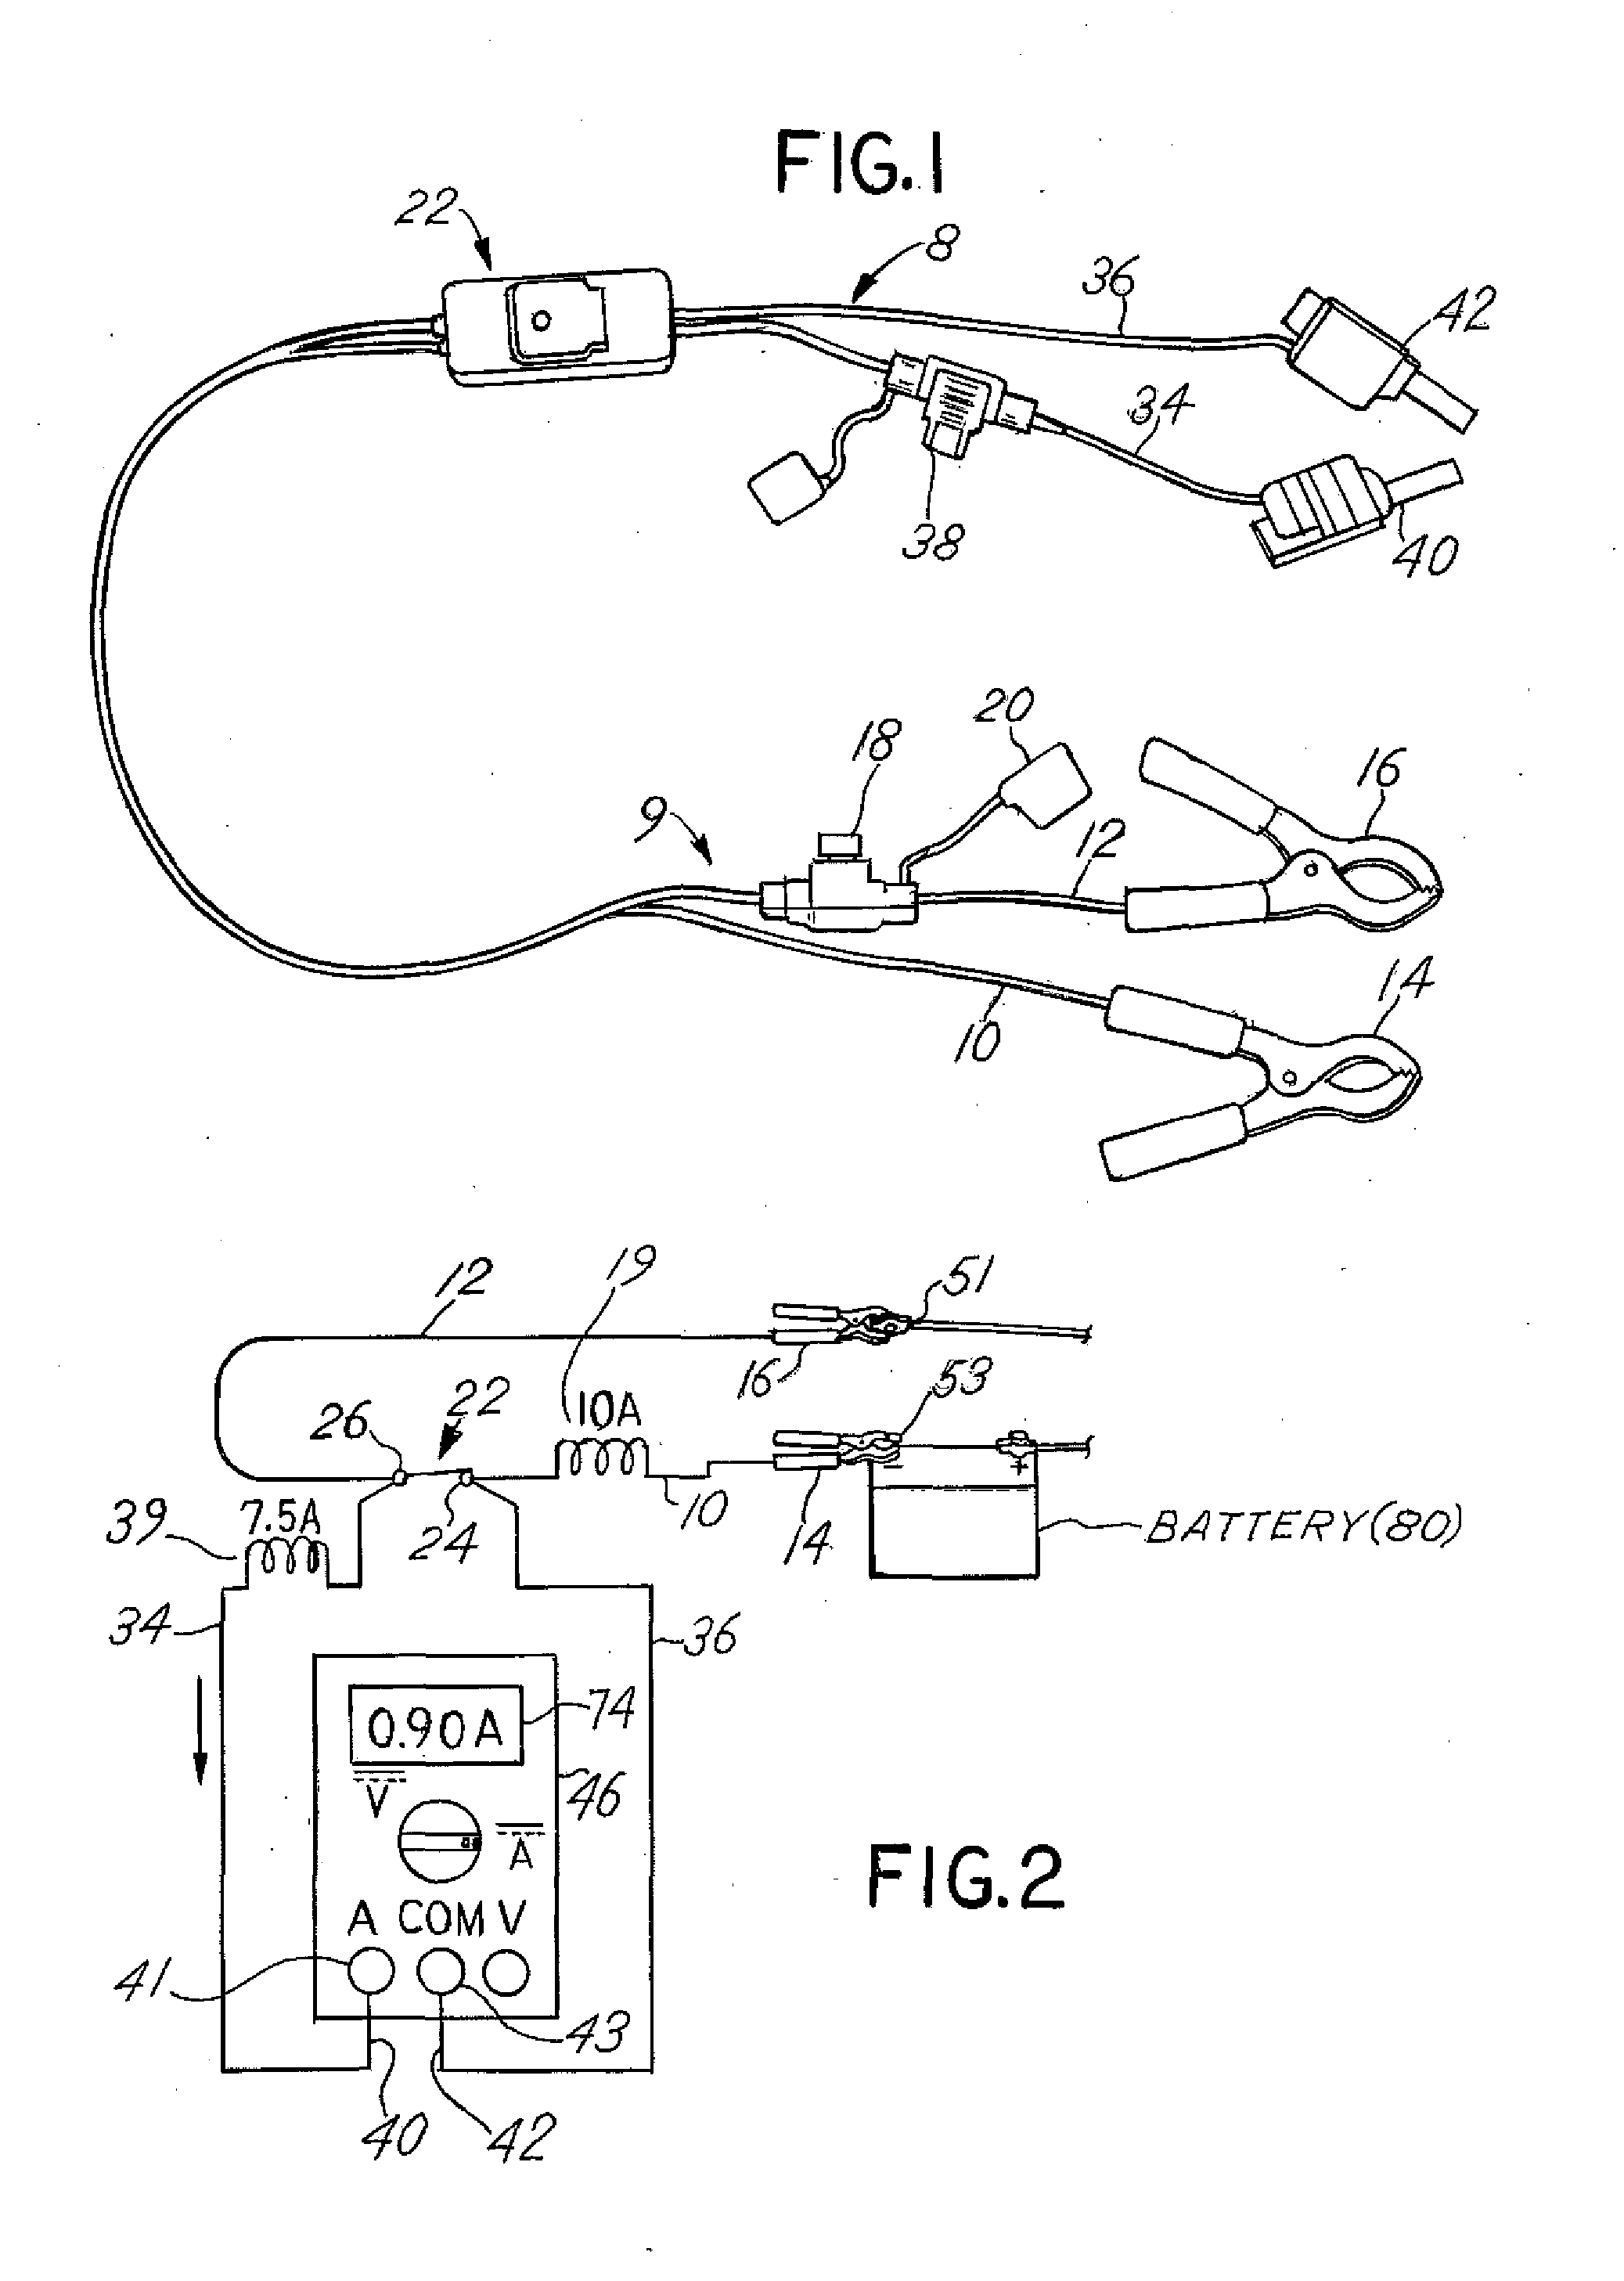 Parasitic battery drain test assembly for multiple component vehicle circuitry analysis